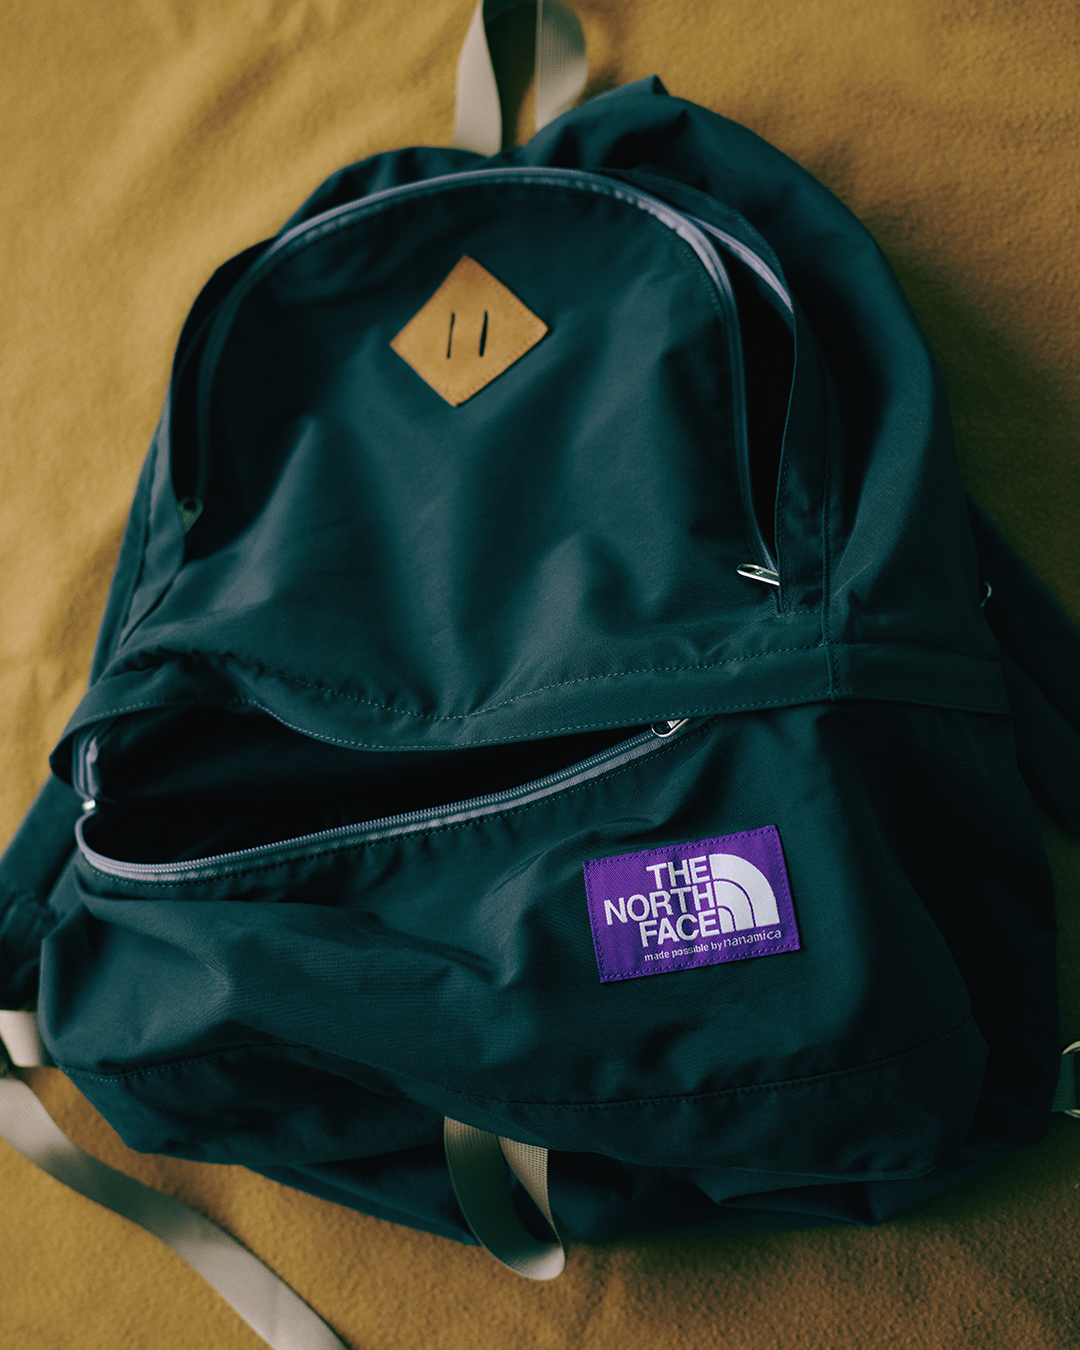 nanamica / THE NORTH FACE PURPLE LABEL / Featured Product vol.22